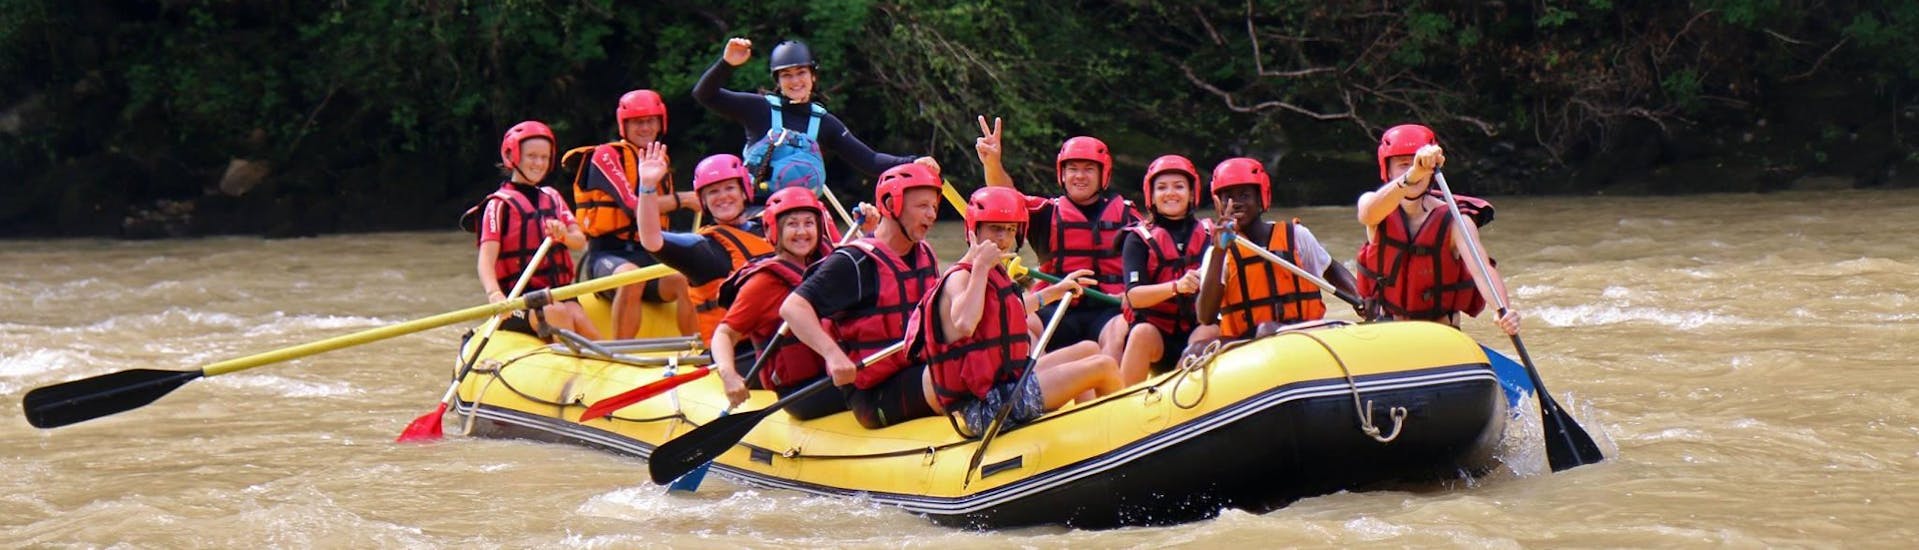 Rafting "Adventure Day" - Gave d'Oloron.